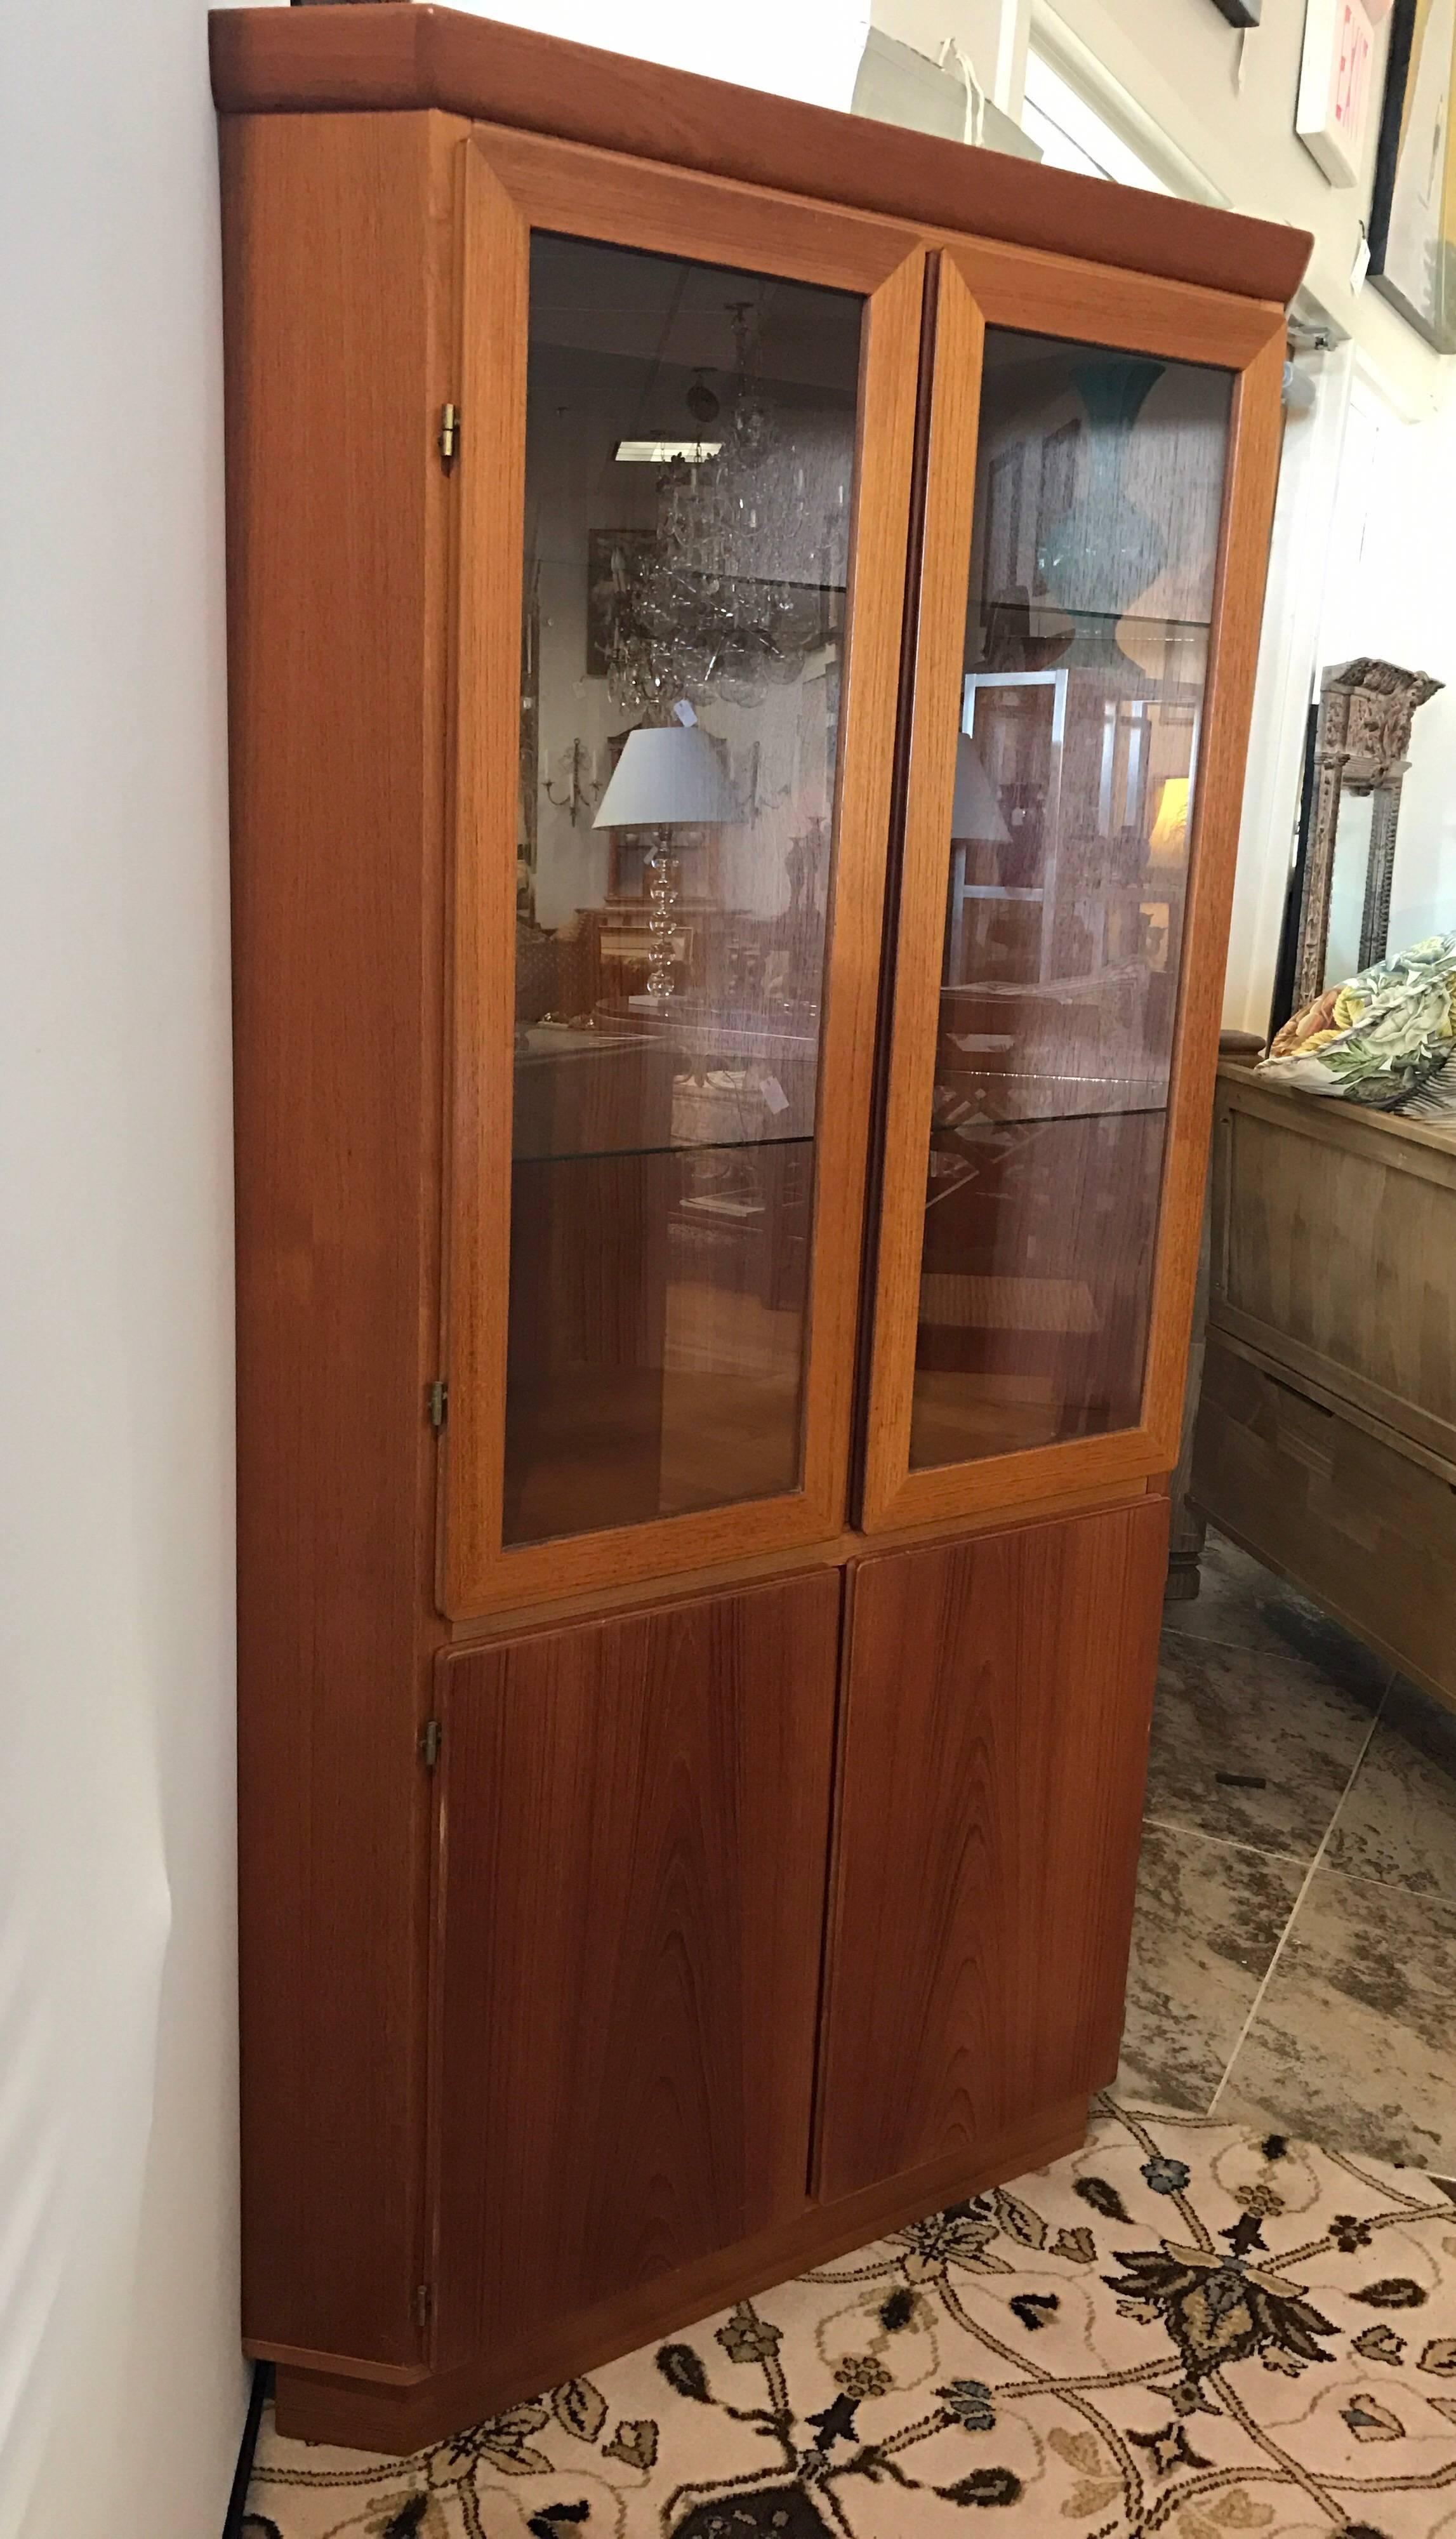 Danish modern signed Skovby Mobelfabrik AS teak corner cabinet with glass doors that open to glass shelves. Bottom part also has two doors that open to shelves. Top part is electrified to light up.